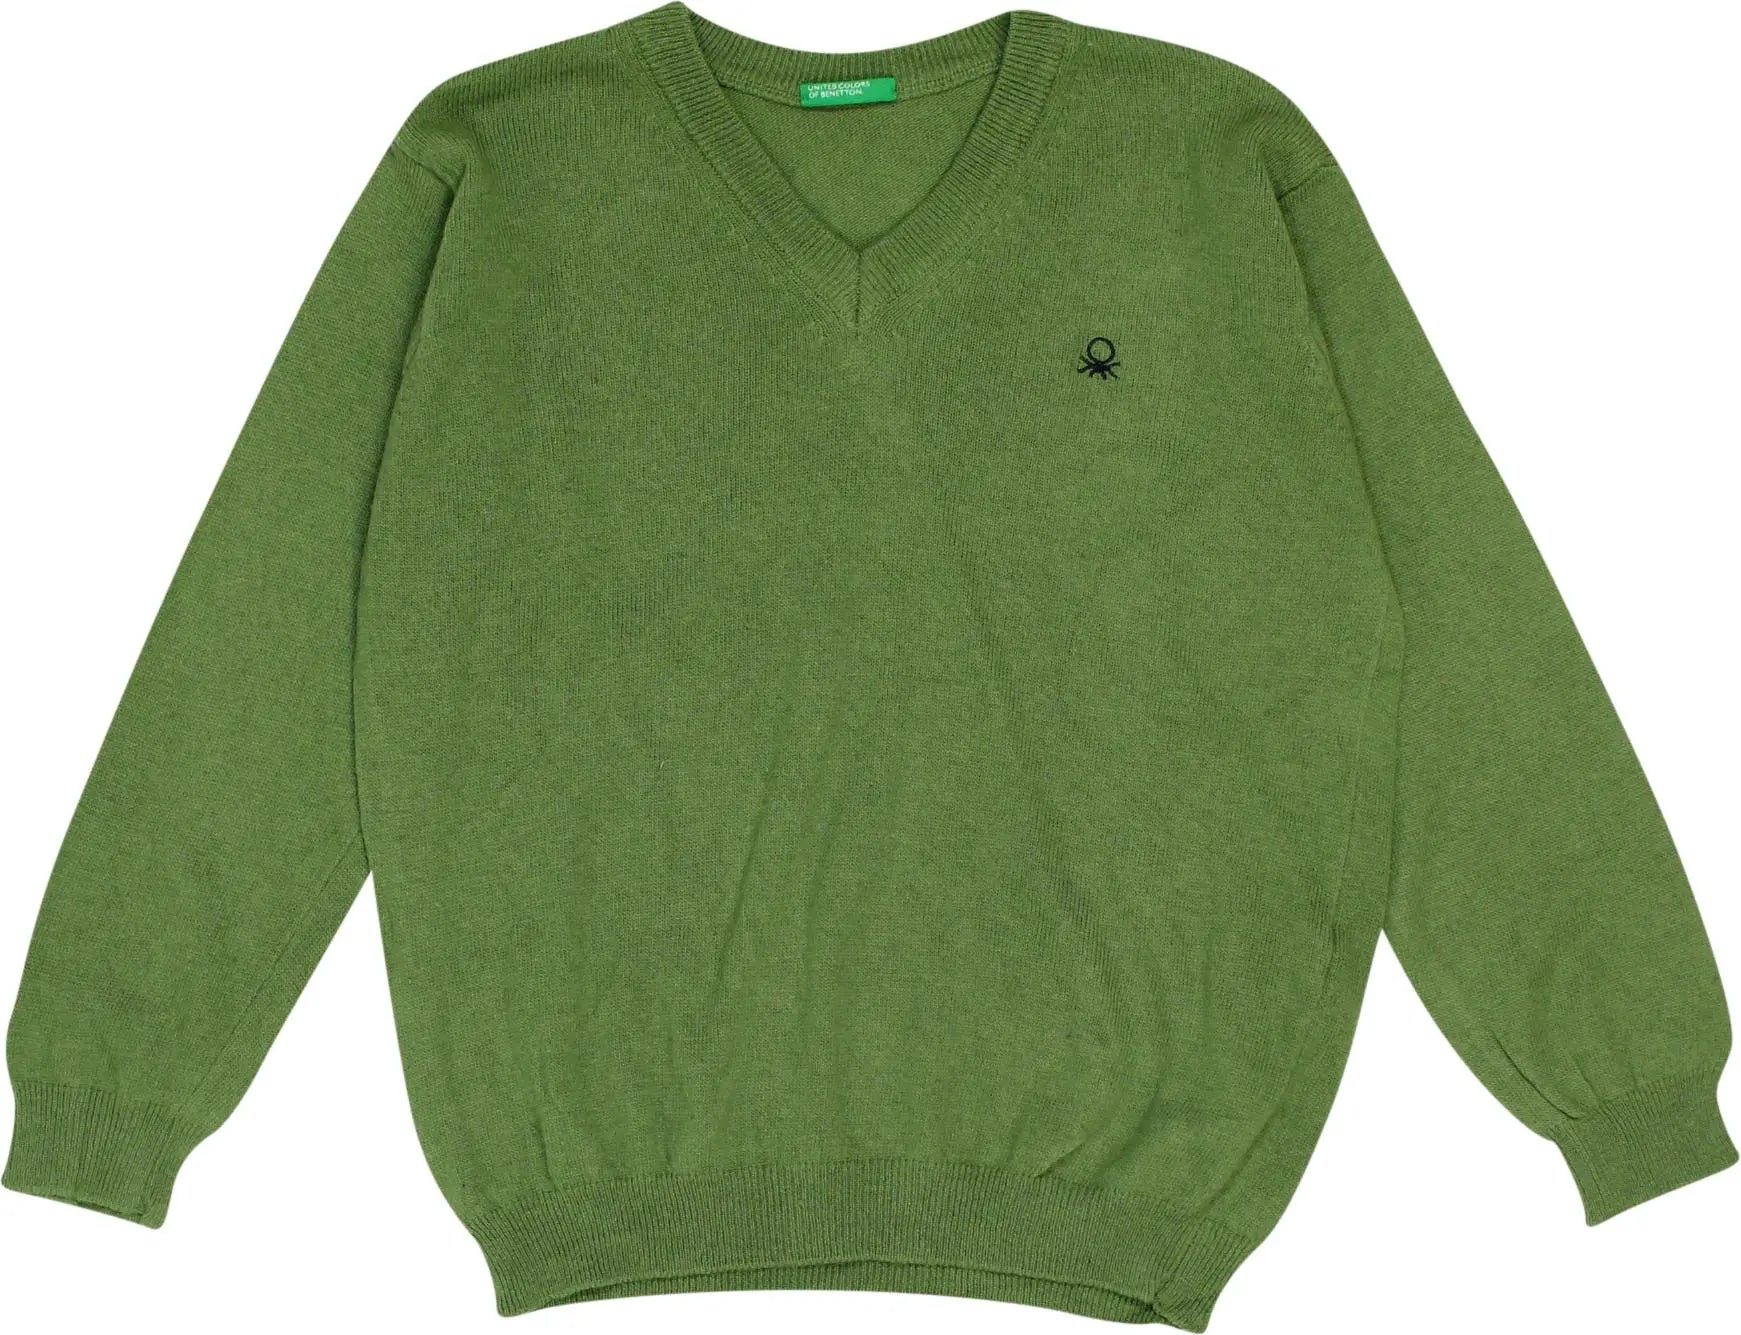 United Colors of Benetton - Green Wool Blend Sweater- ThriftTale.com - Vintage and second handclothing